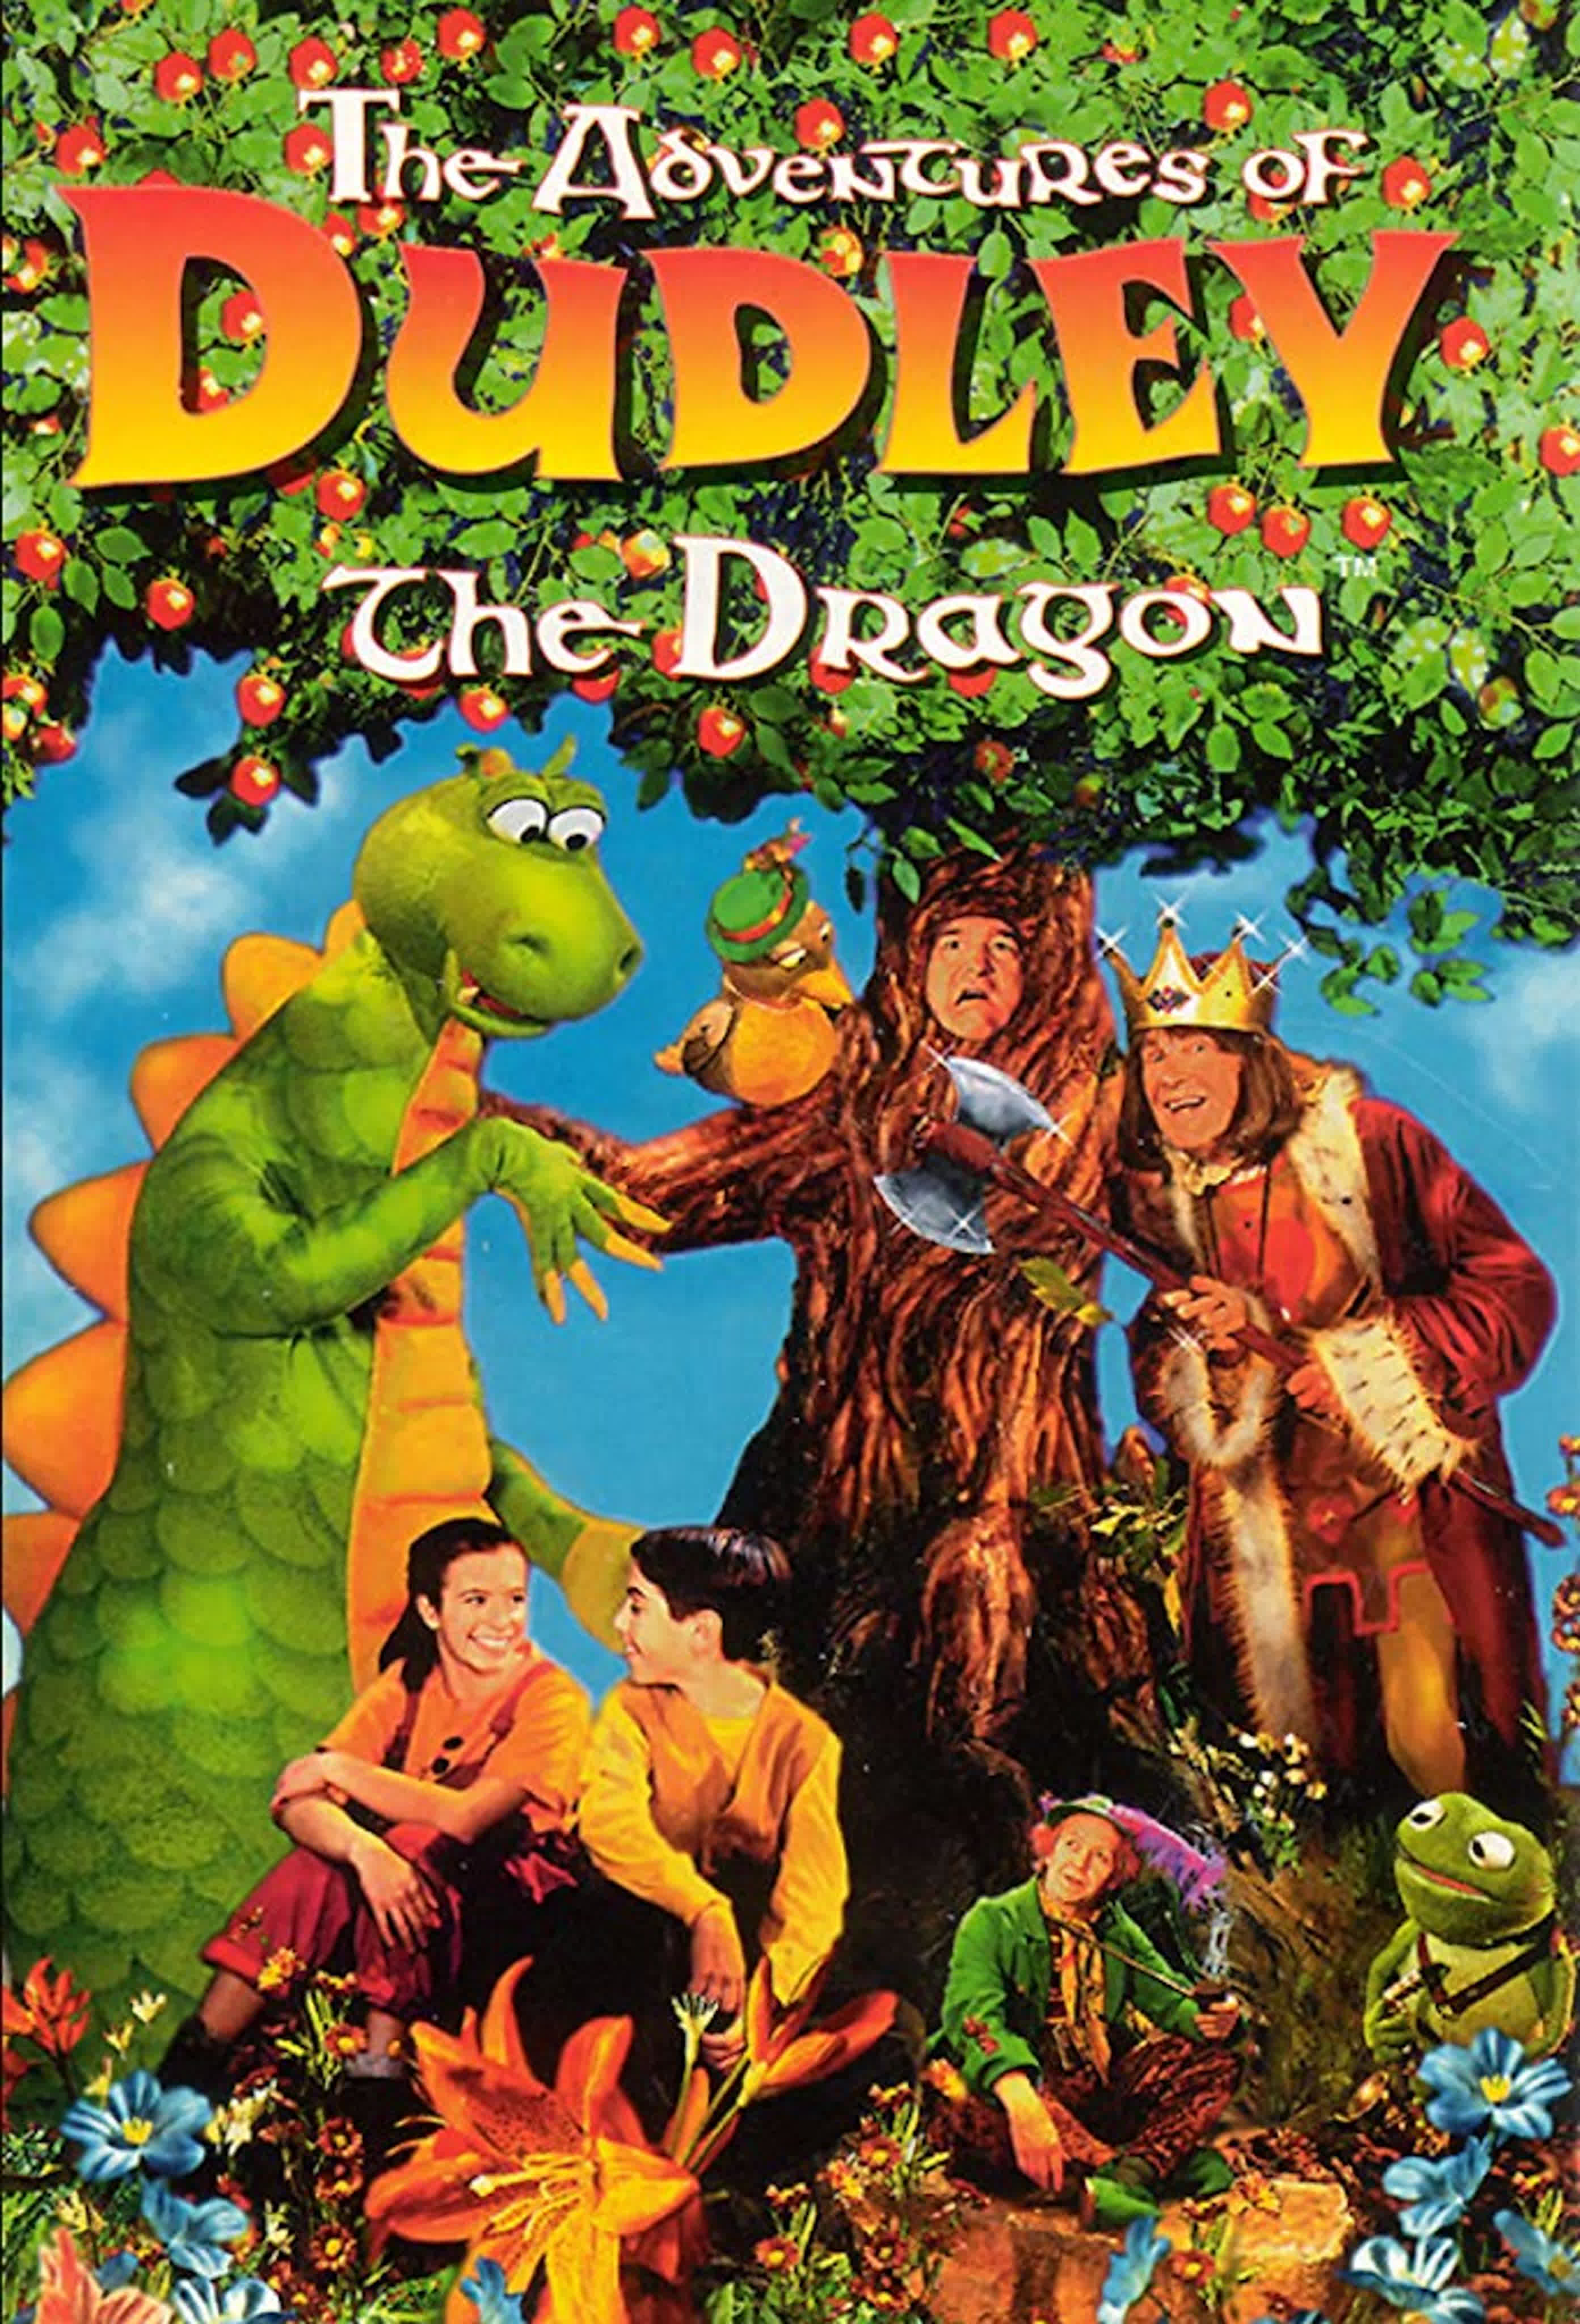 The Adventures of Dudley the Dragon (1993–1999) 1994 - 1999)